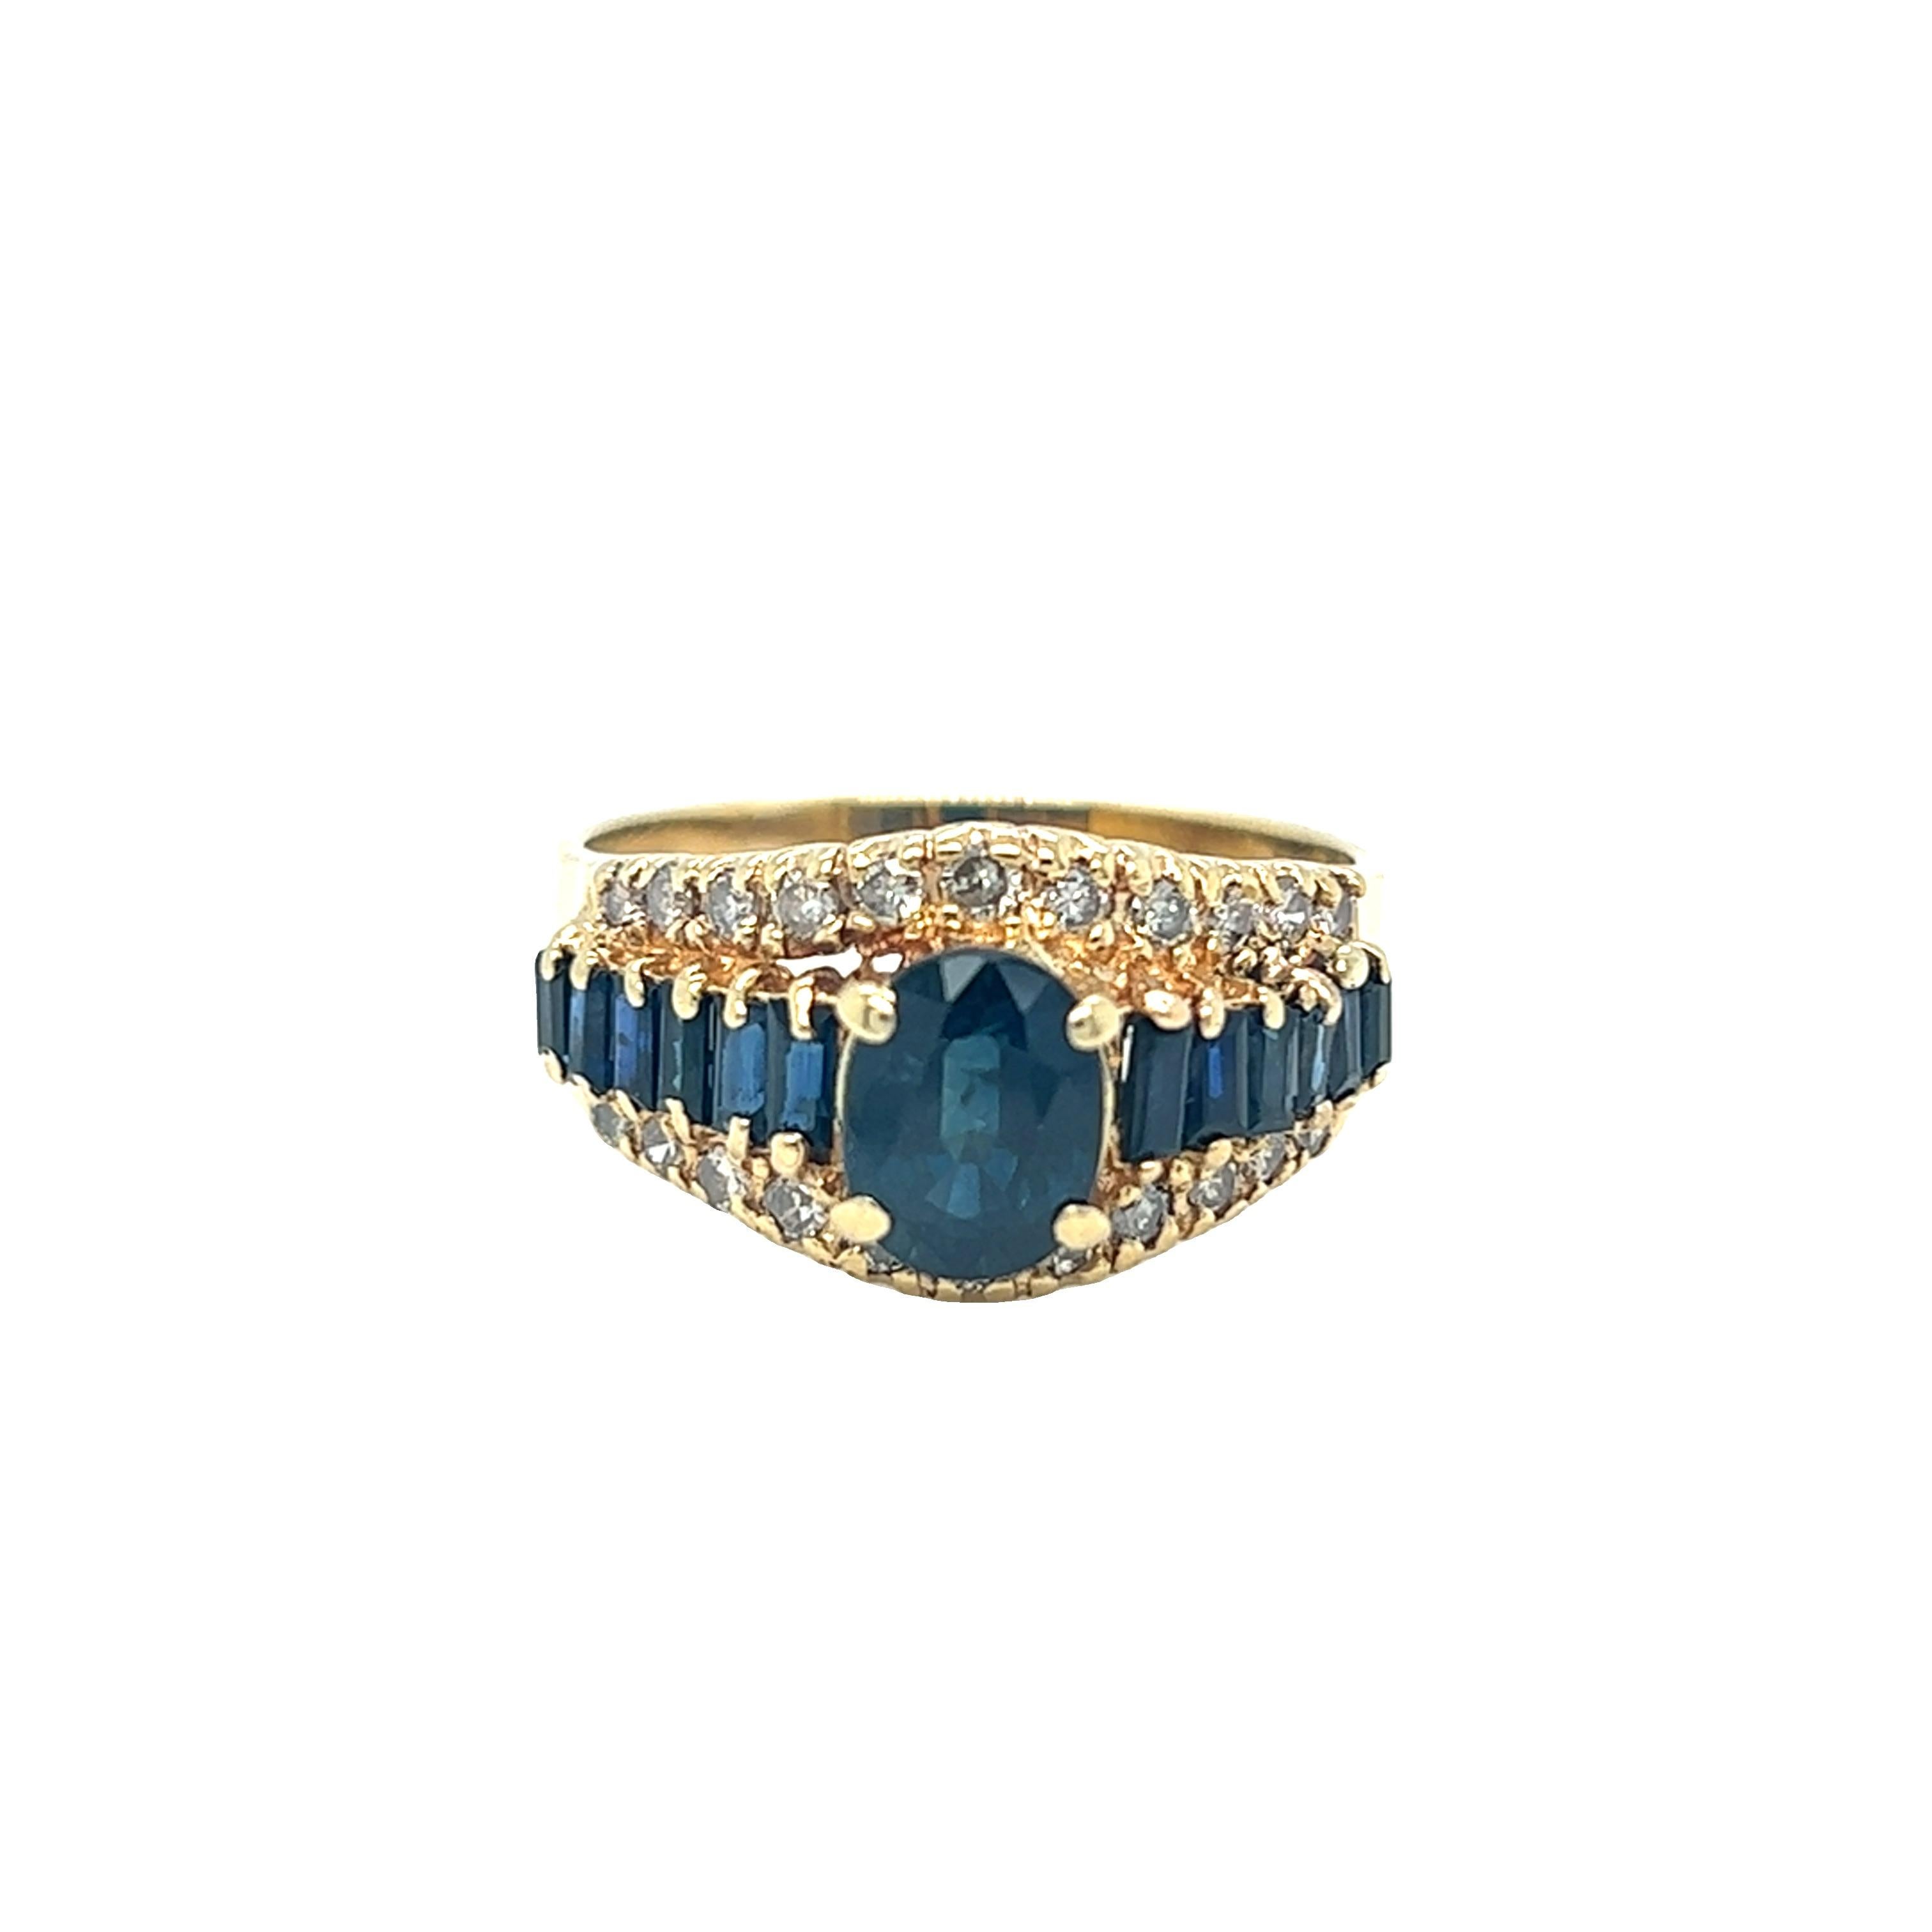 Vintage sapphire ring features oval shaped sapphire with baguette sapphire graduation down the band to accentuate the center stone. Small round brilliant cut diamonds on either side of the sapphire create a beautiful contrast. The ring was crafted